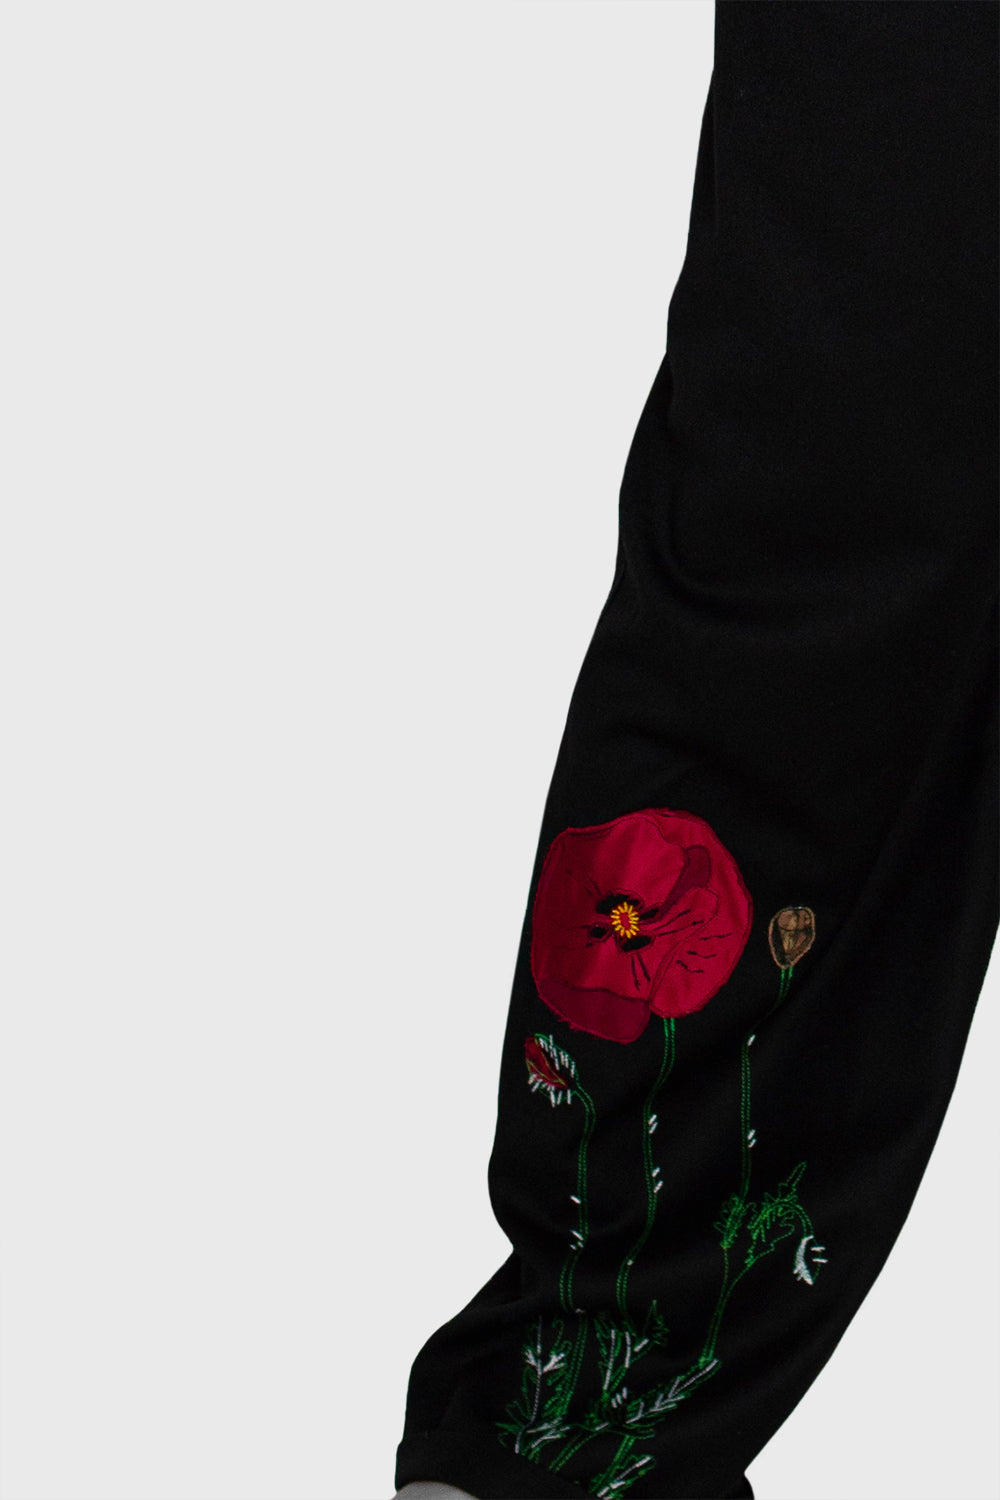 women's trousers, casual and office style, with an embroidery on one leg, discreet and beautiful wild poppy flower, for an artful touch to your look, luxury detail, red accent, silk